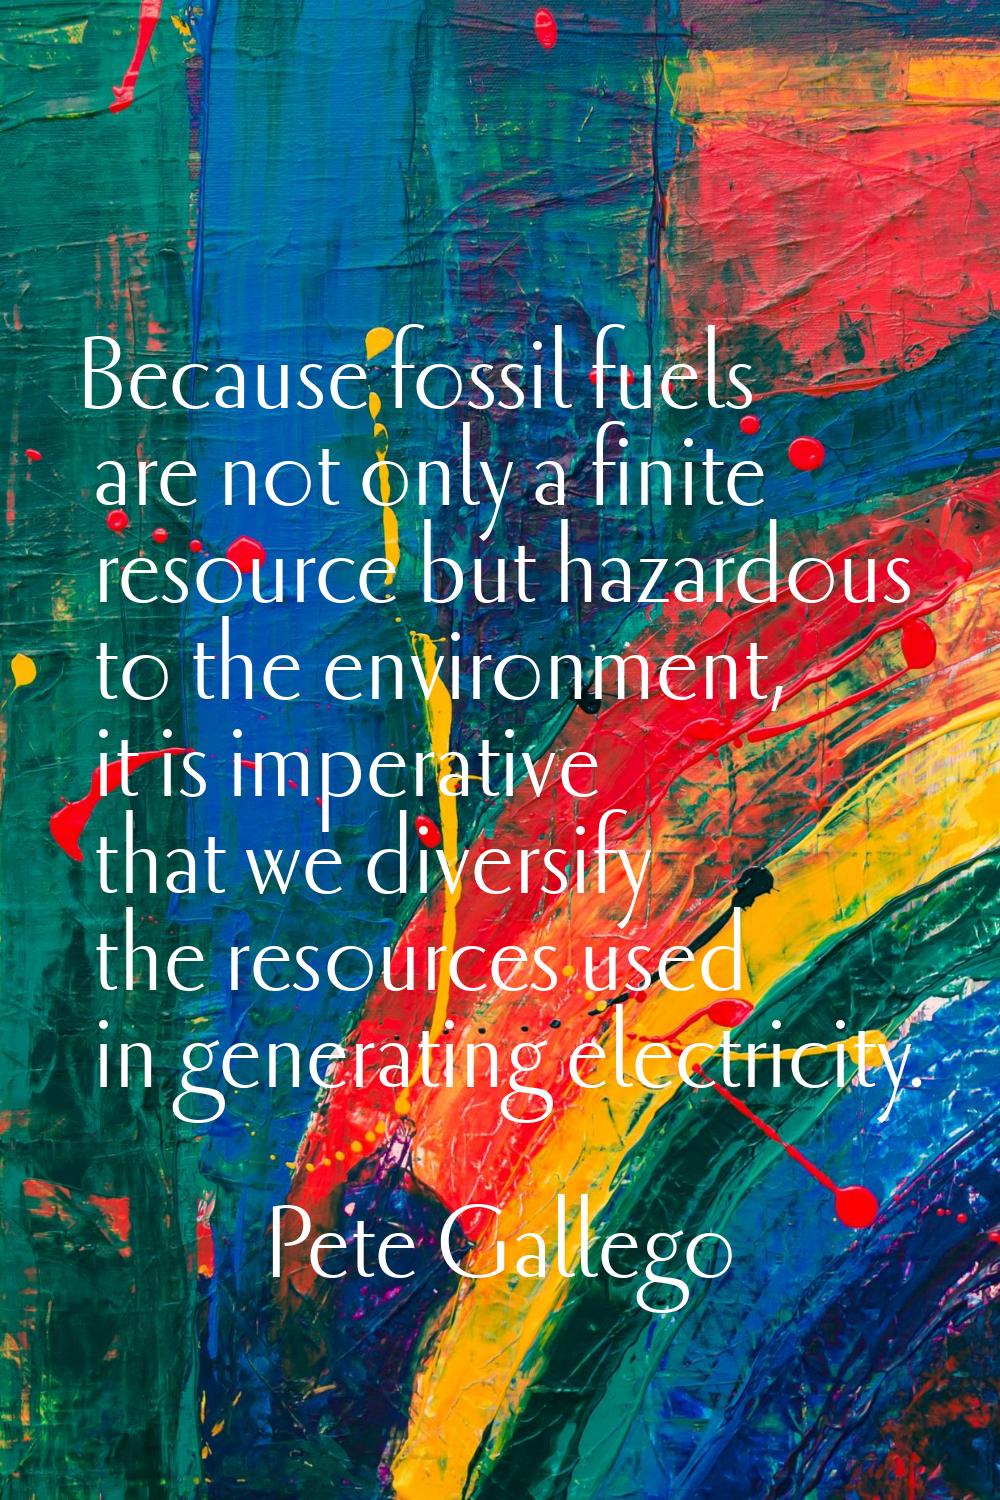 Because fossil fuels are not only a finite resource but hazardous to the environment, it is imperat